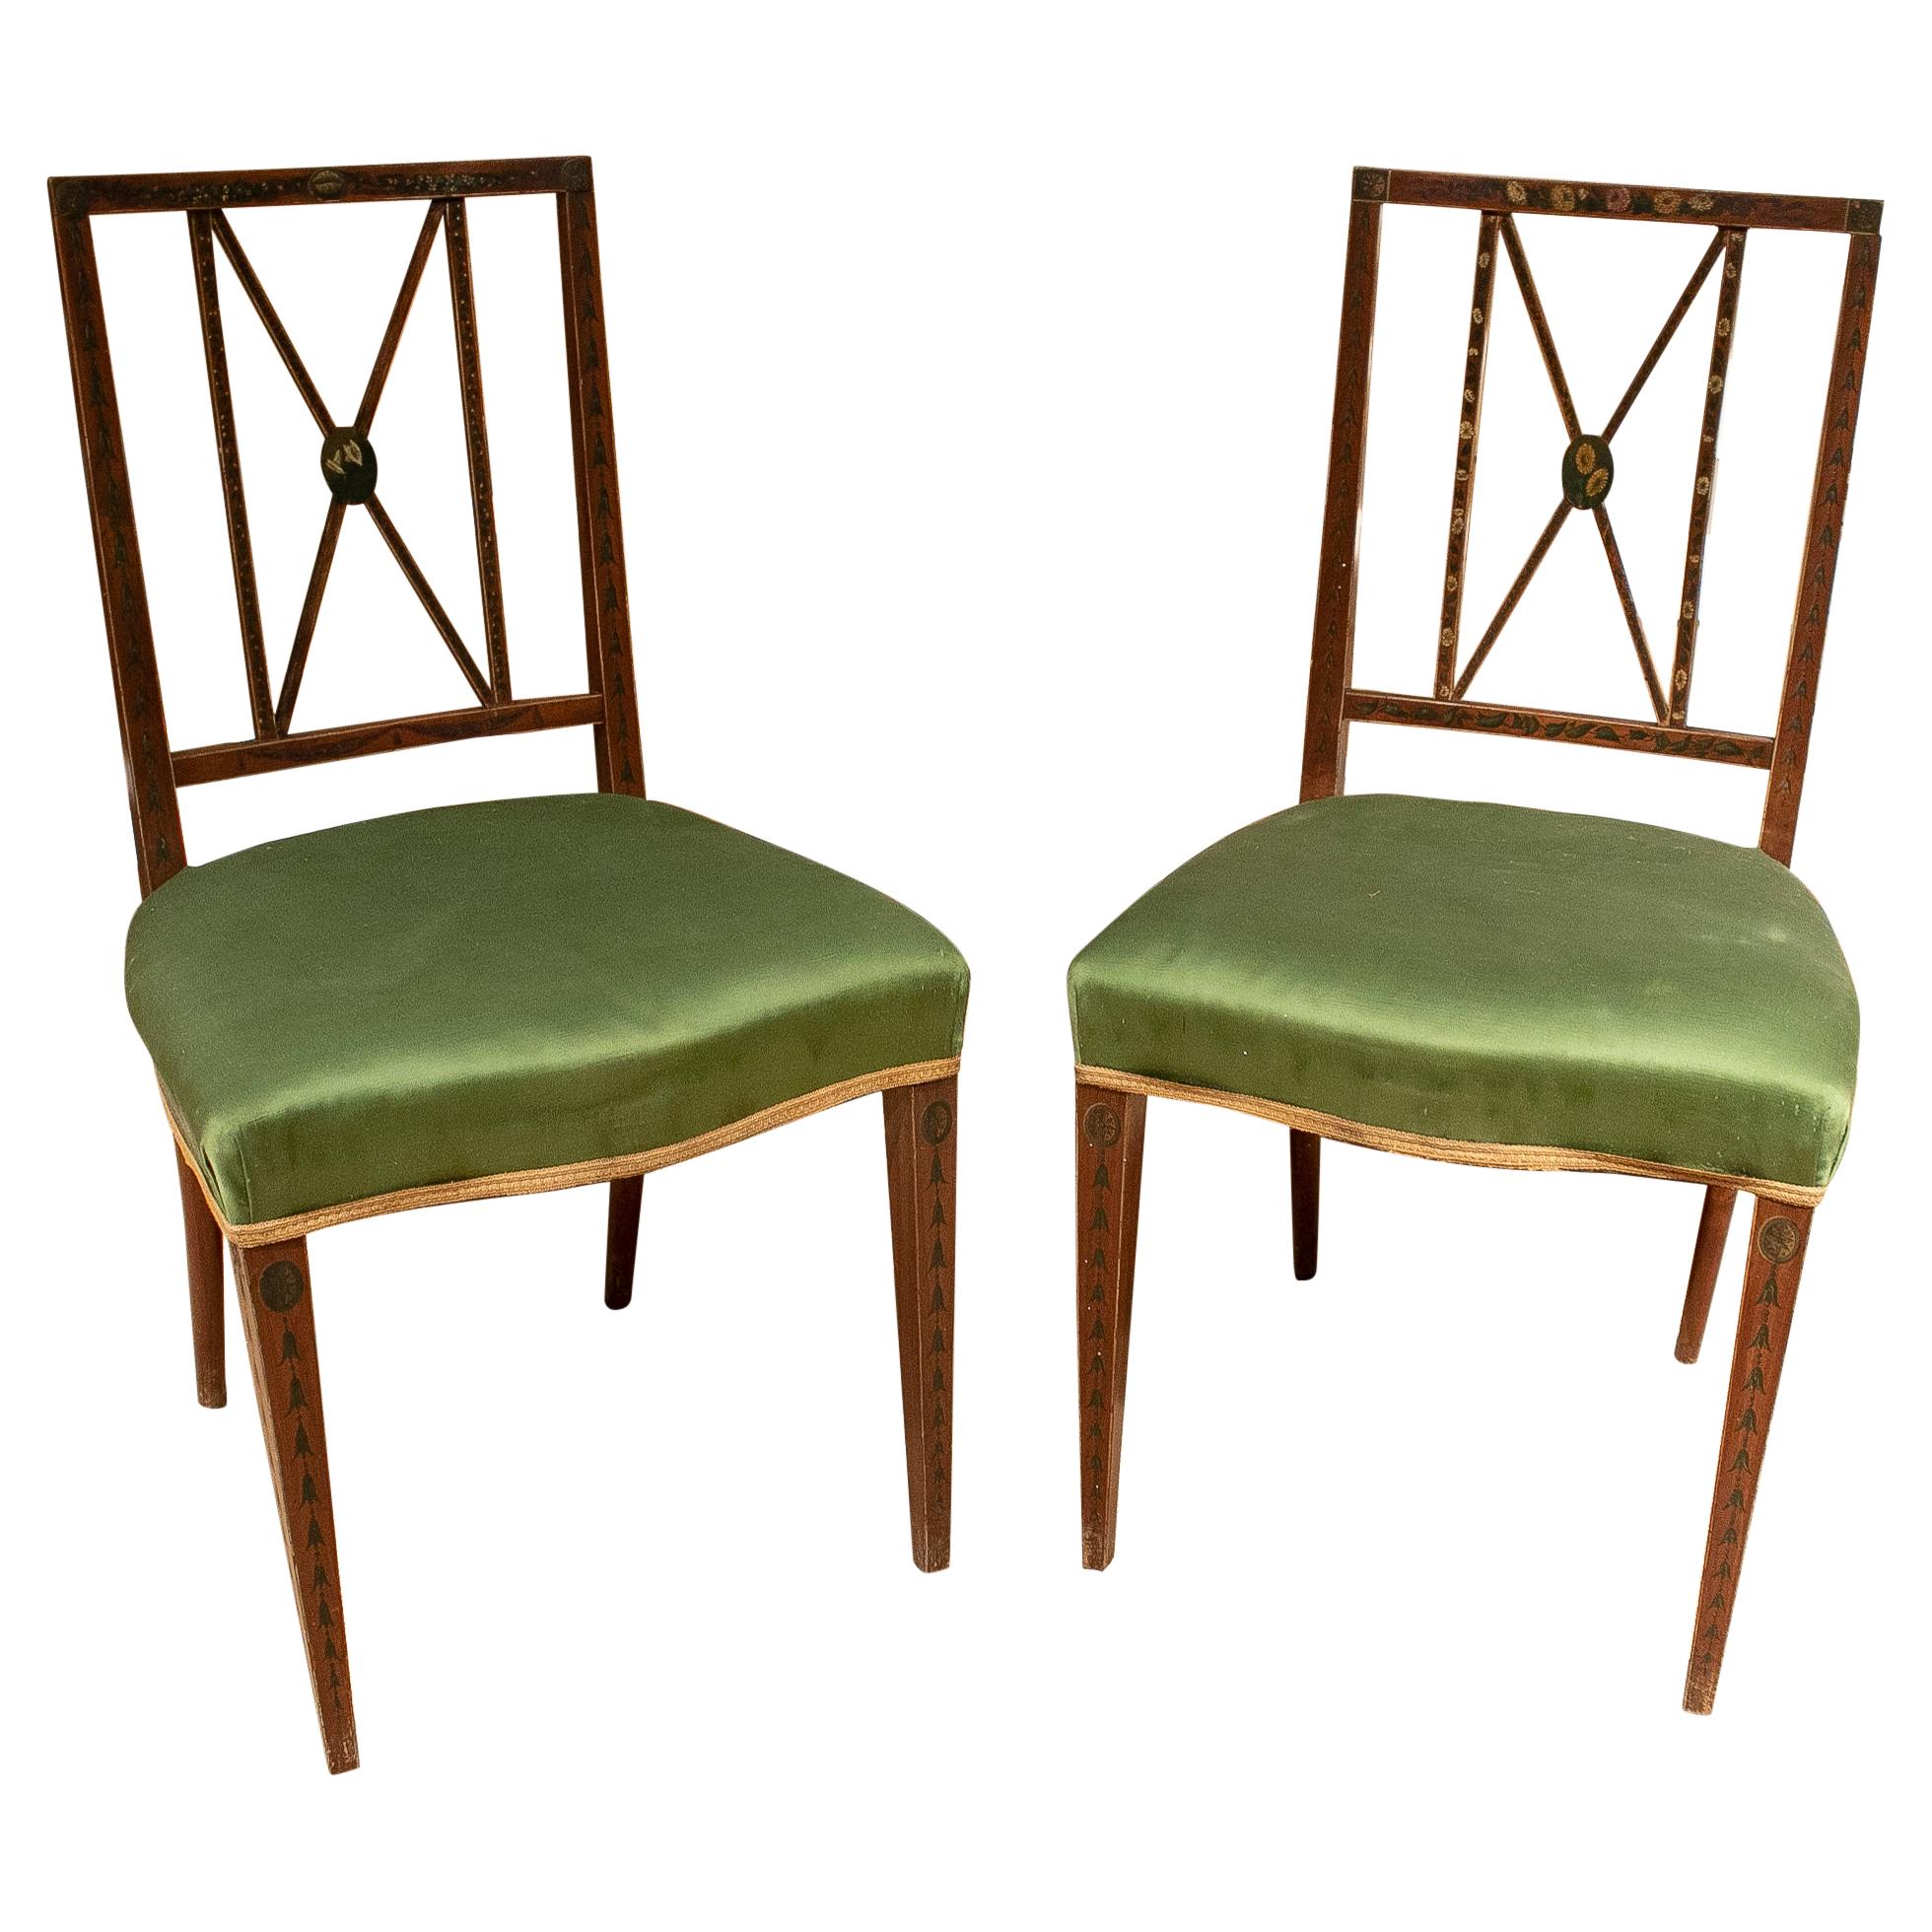 Pair of 19th Century Hand Painted English Silk Upholstered Chairs